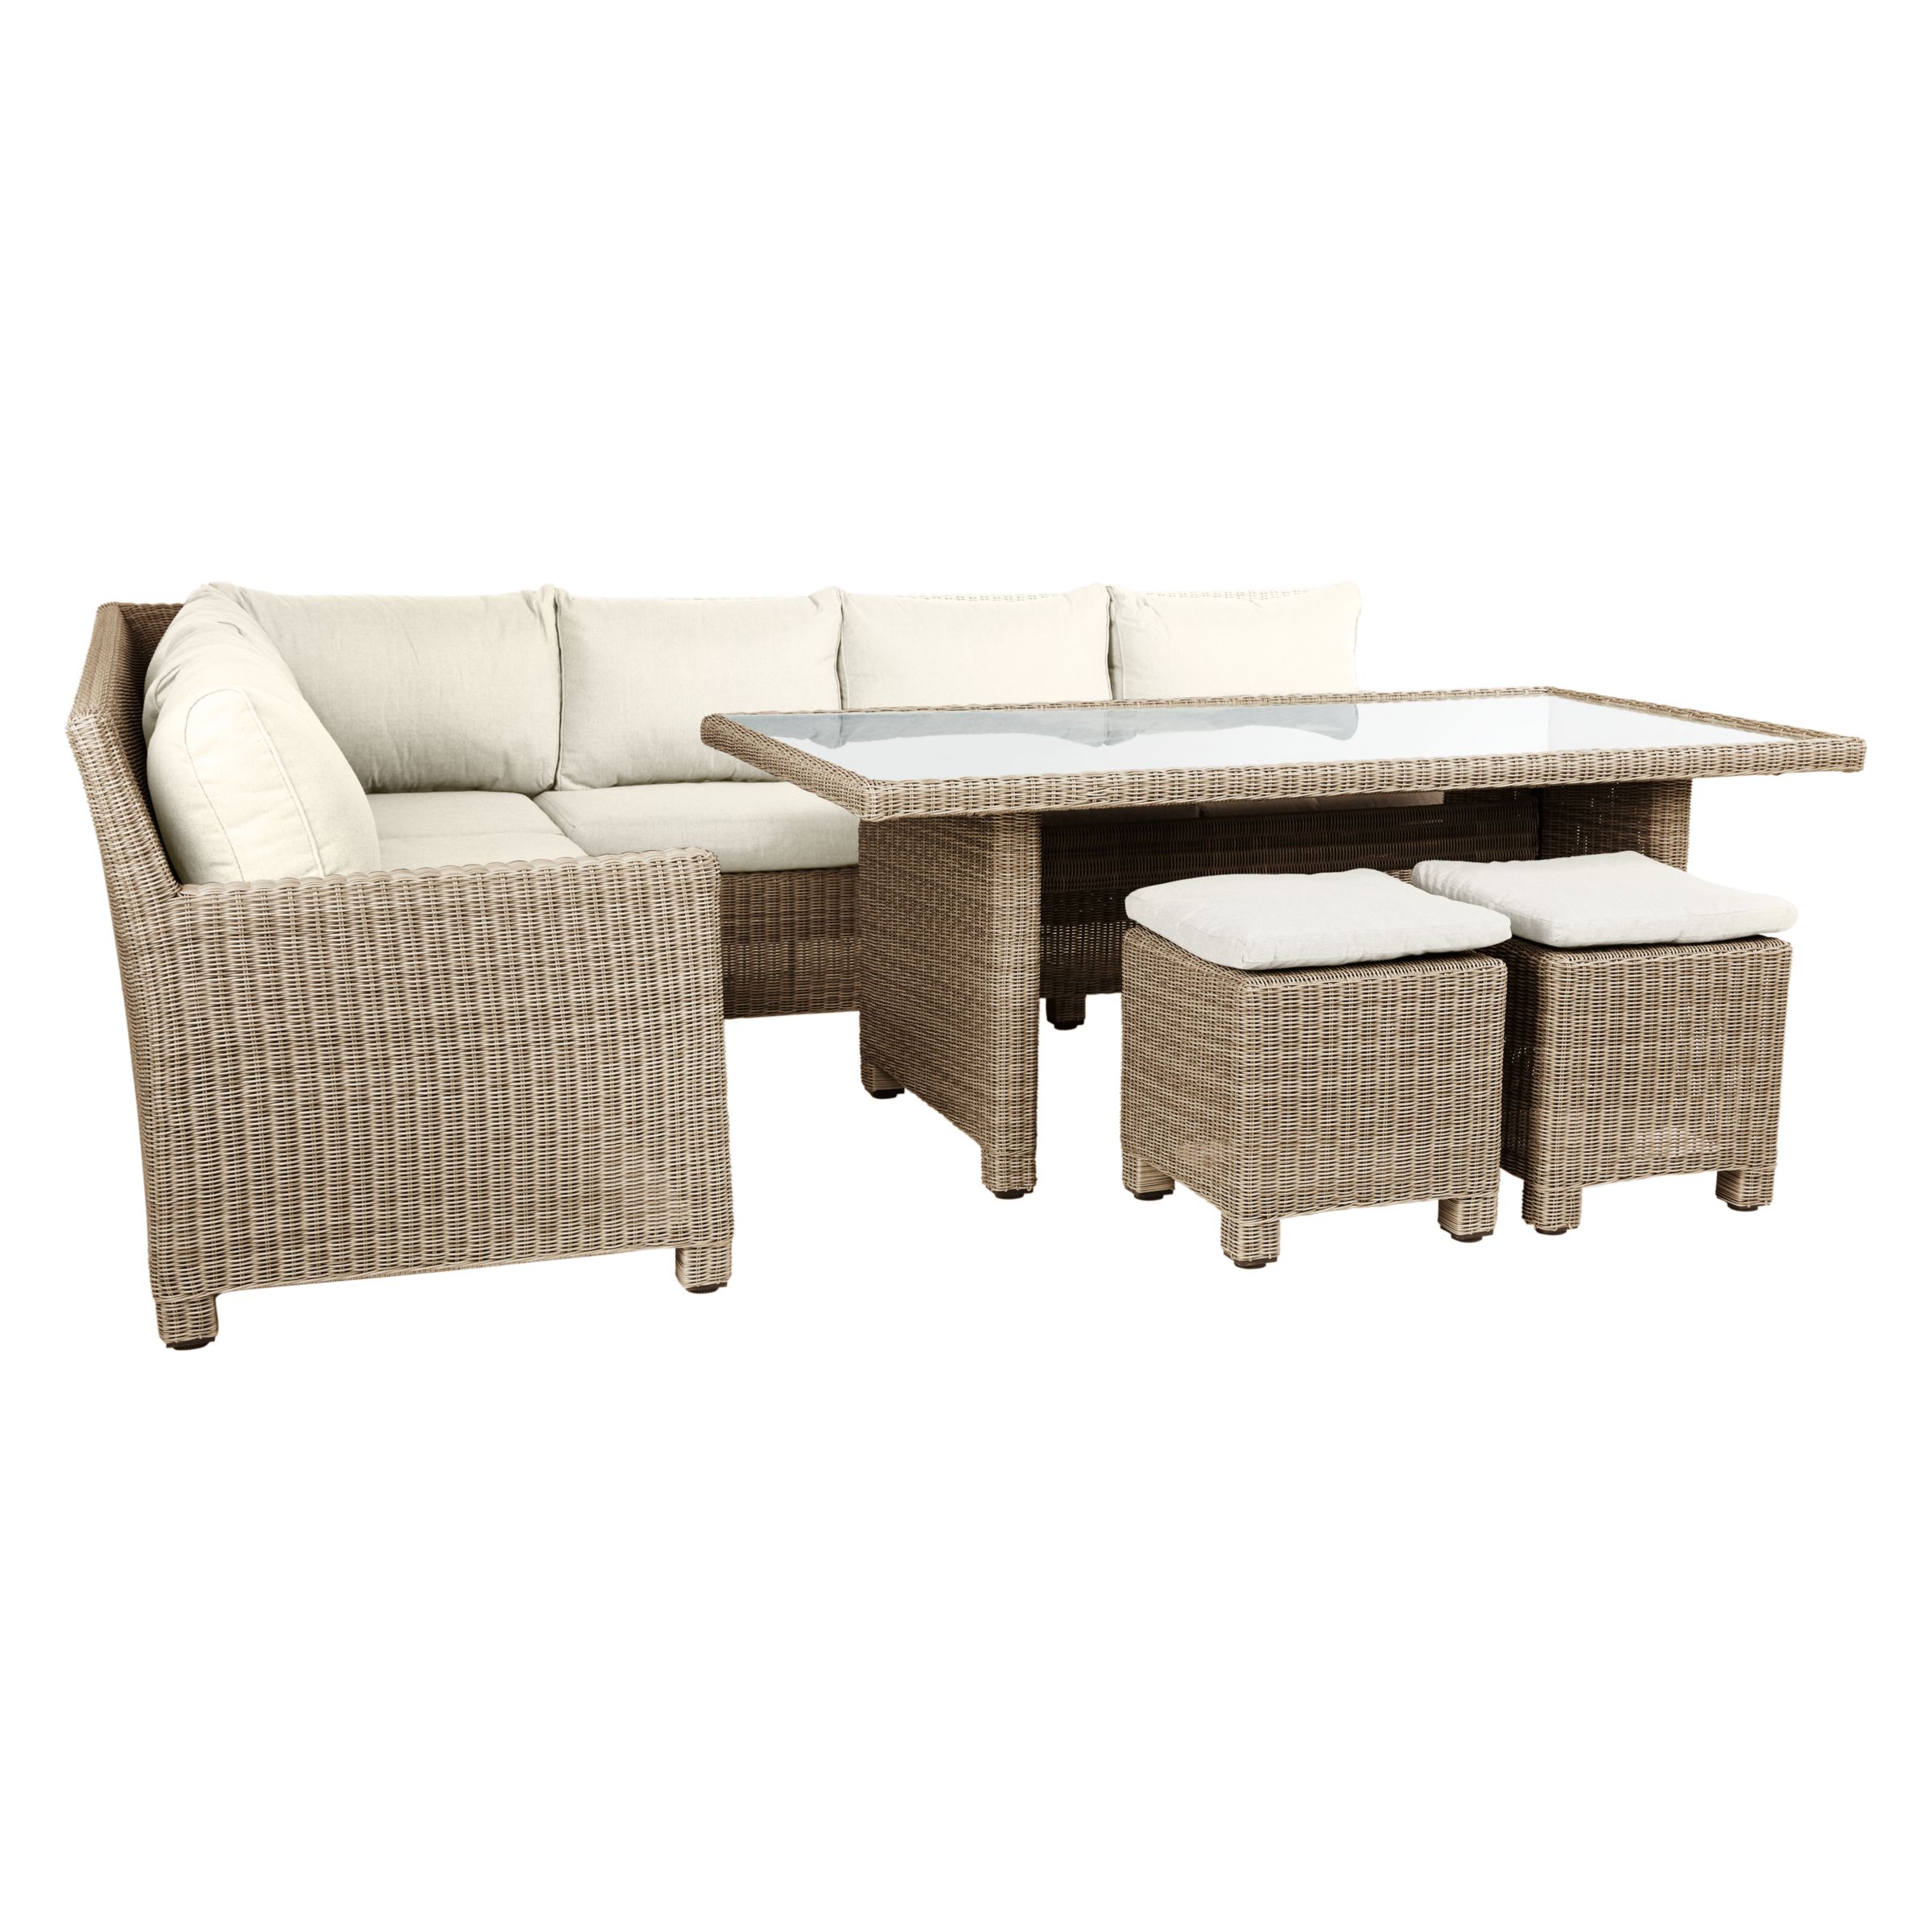 John Lewis & Partners Dante Corner Dining Sofa With Table & 2 Footstools